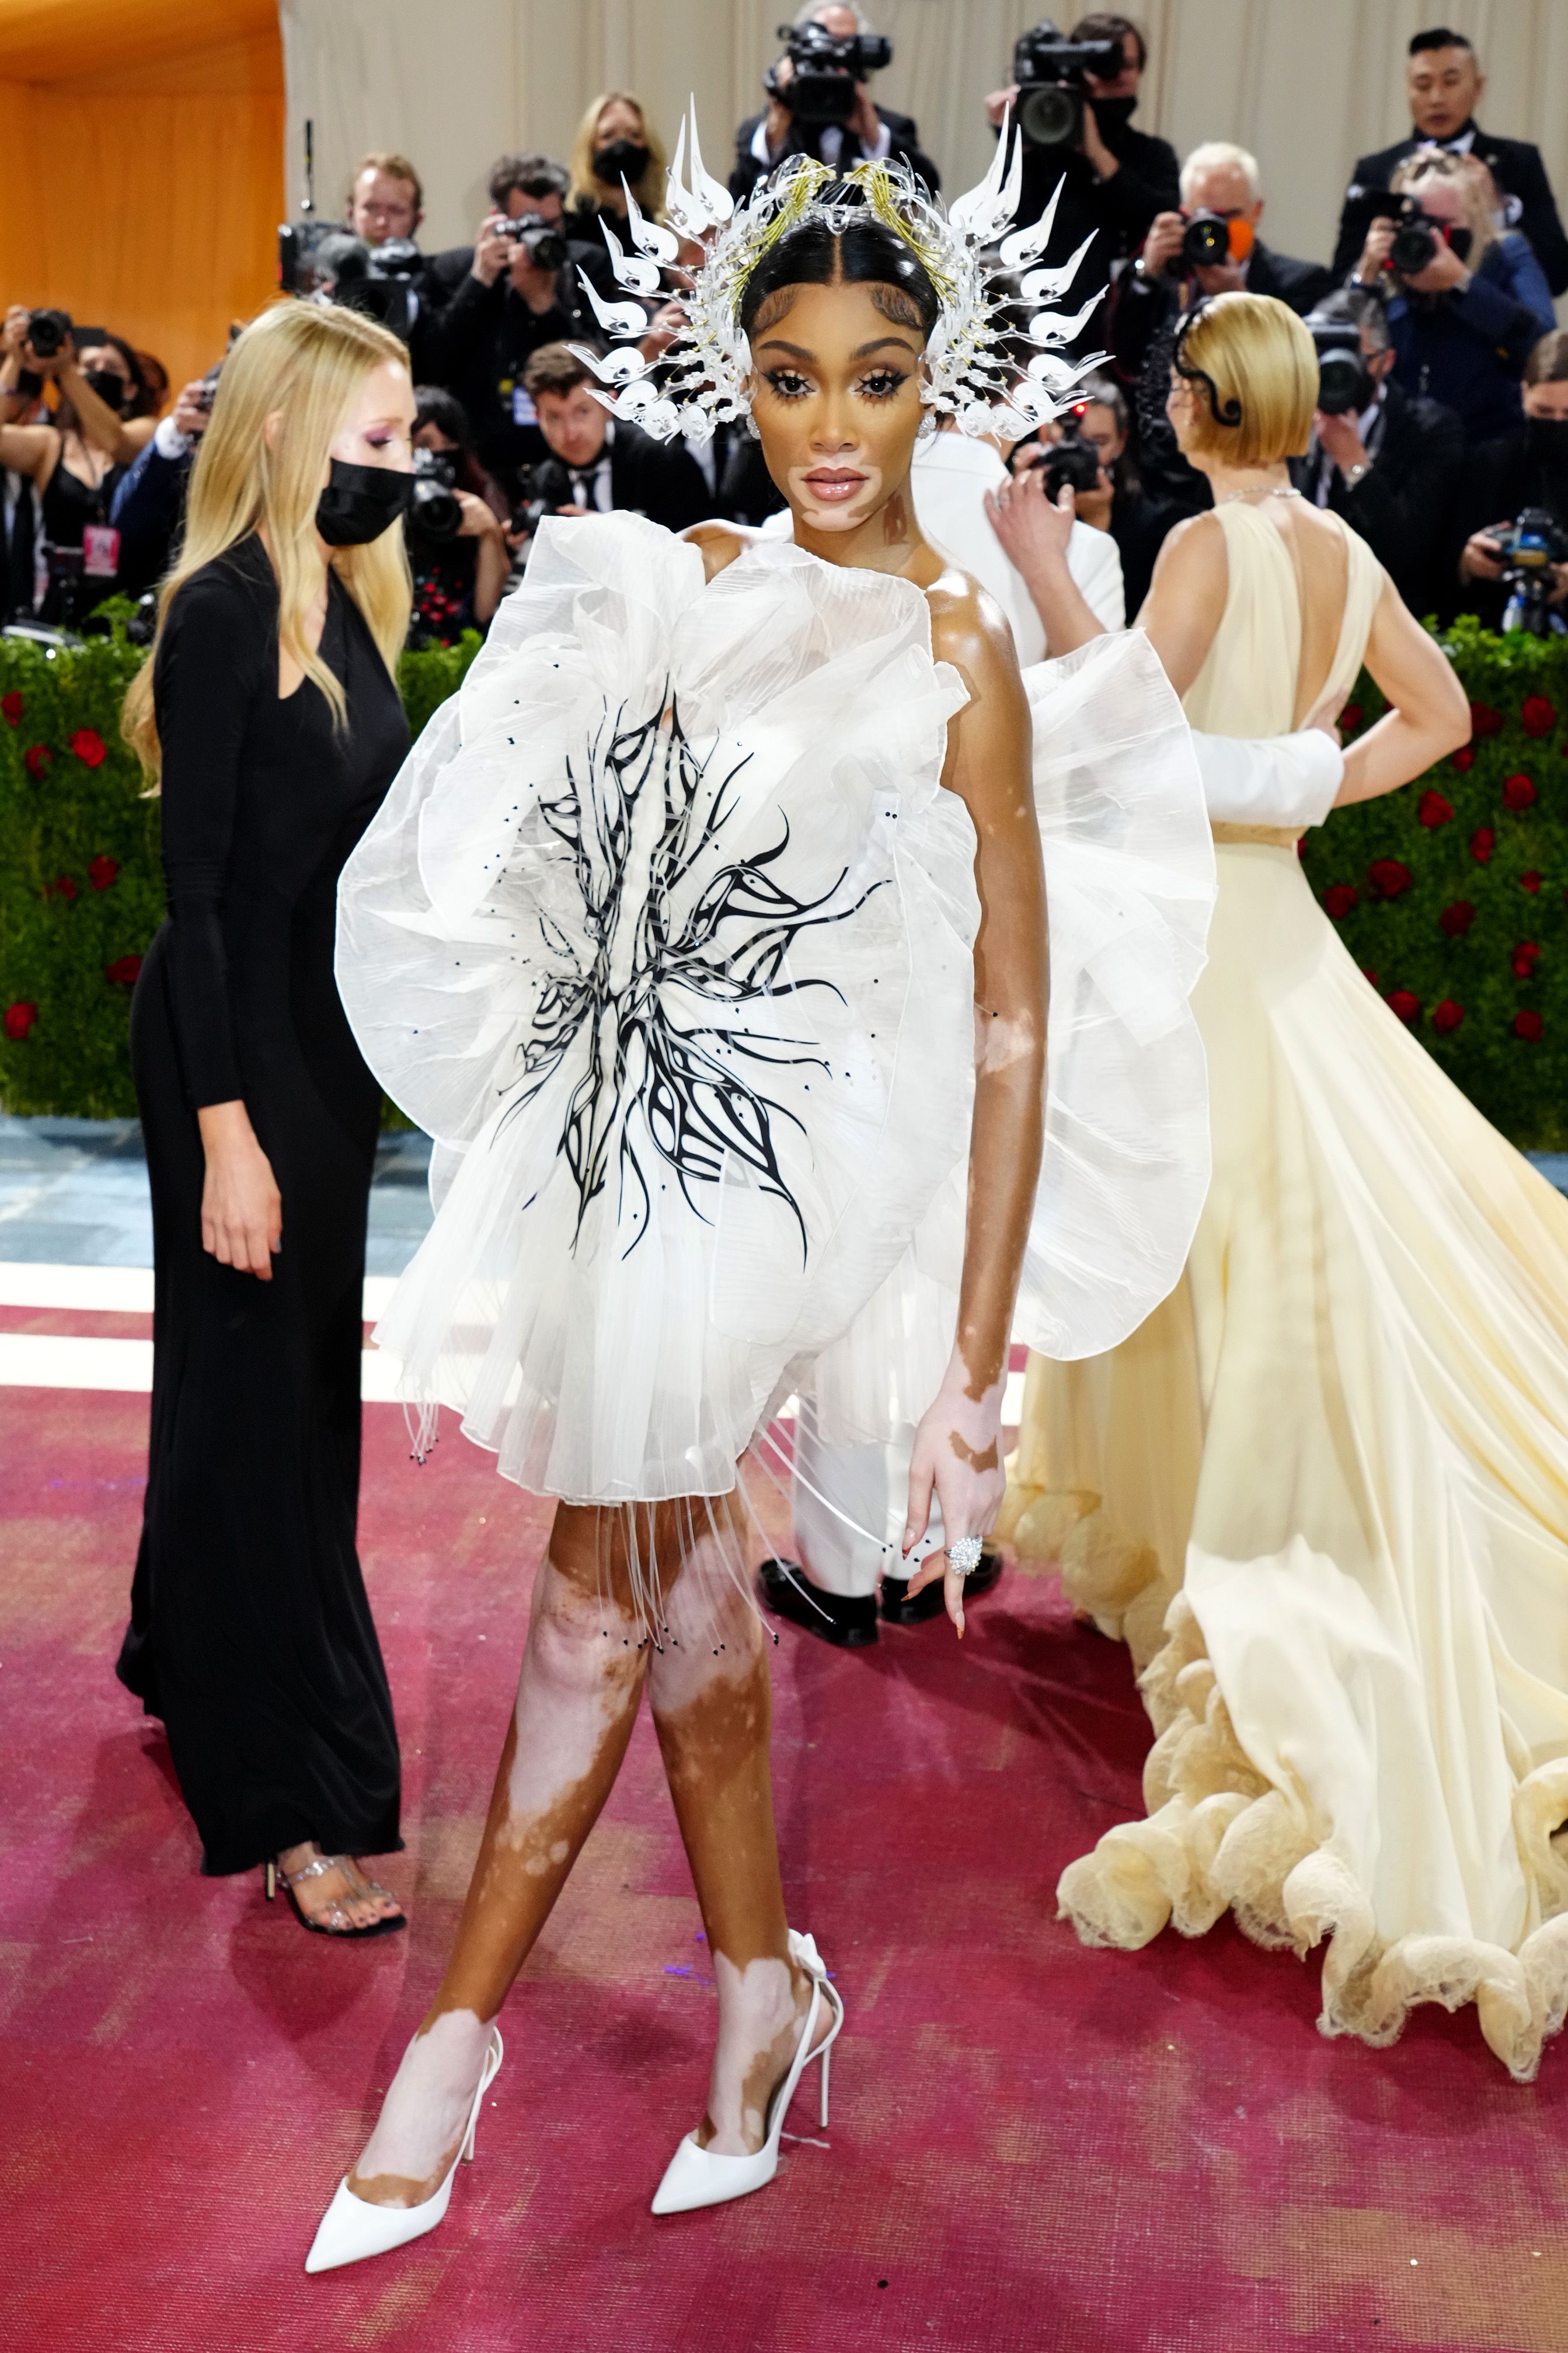 Met Gala Red Carpet Style: Photos of the Most Famous Dresses and